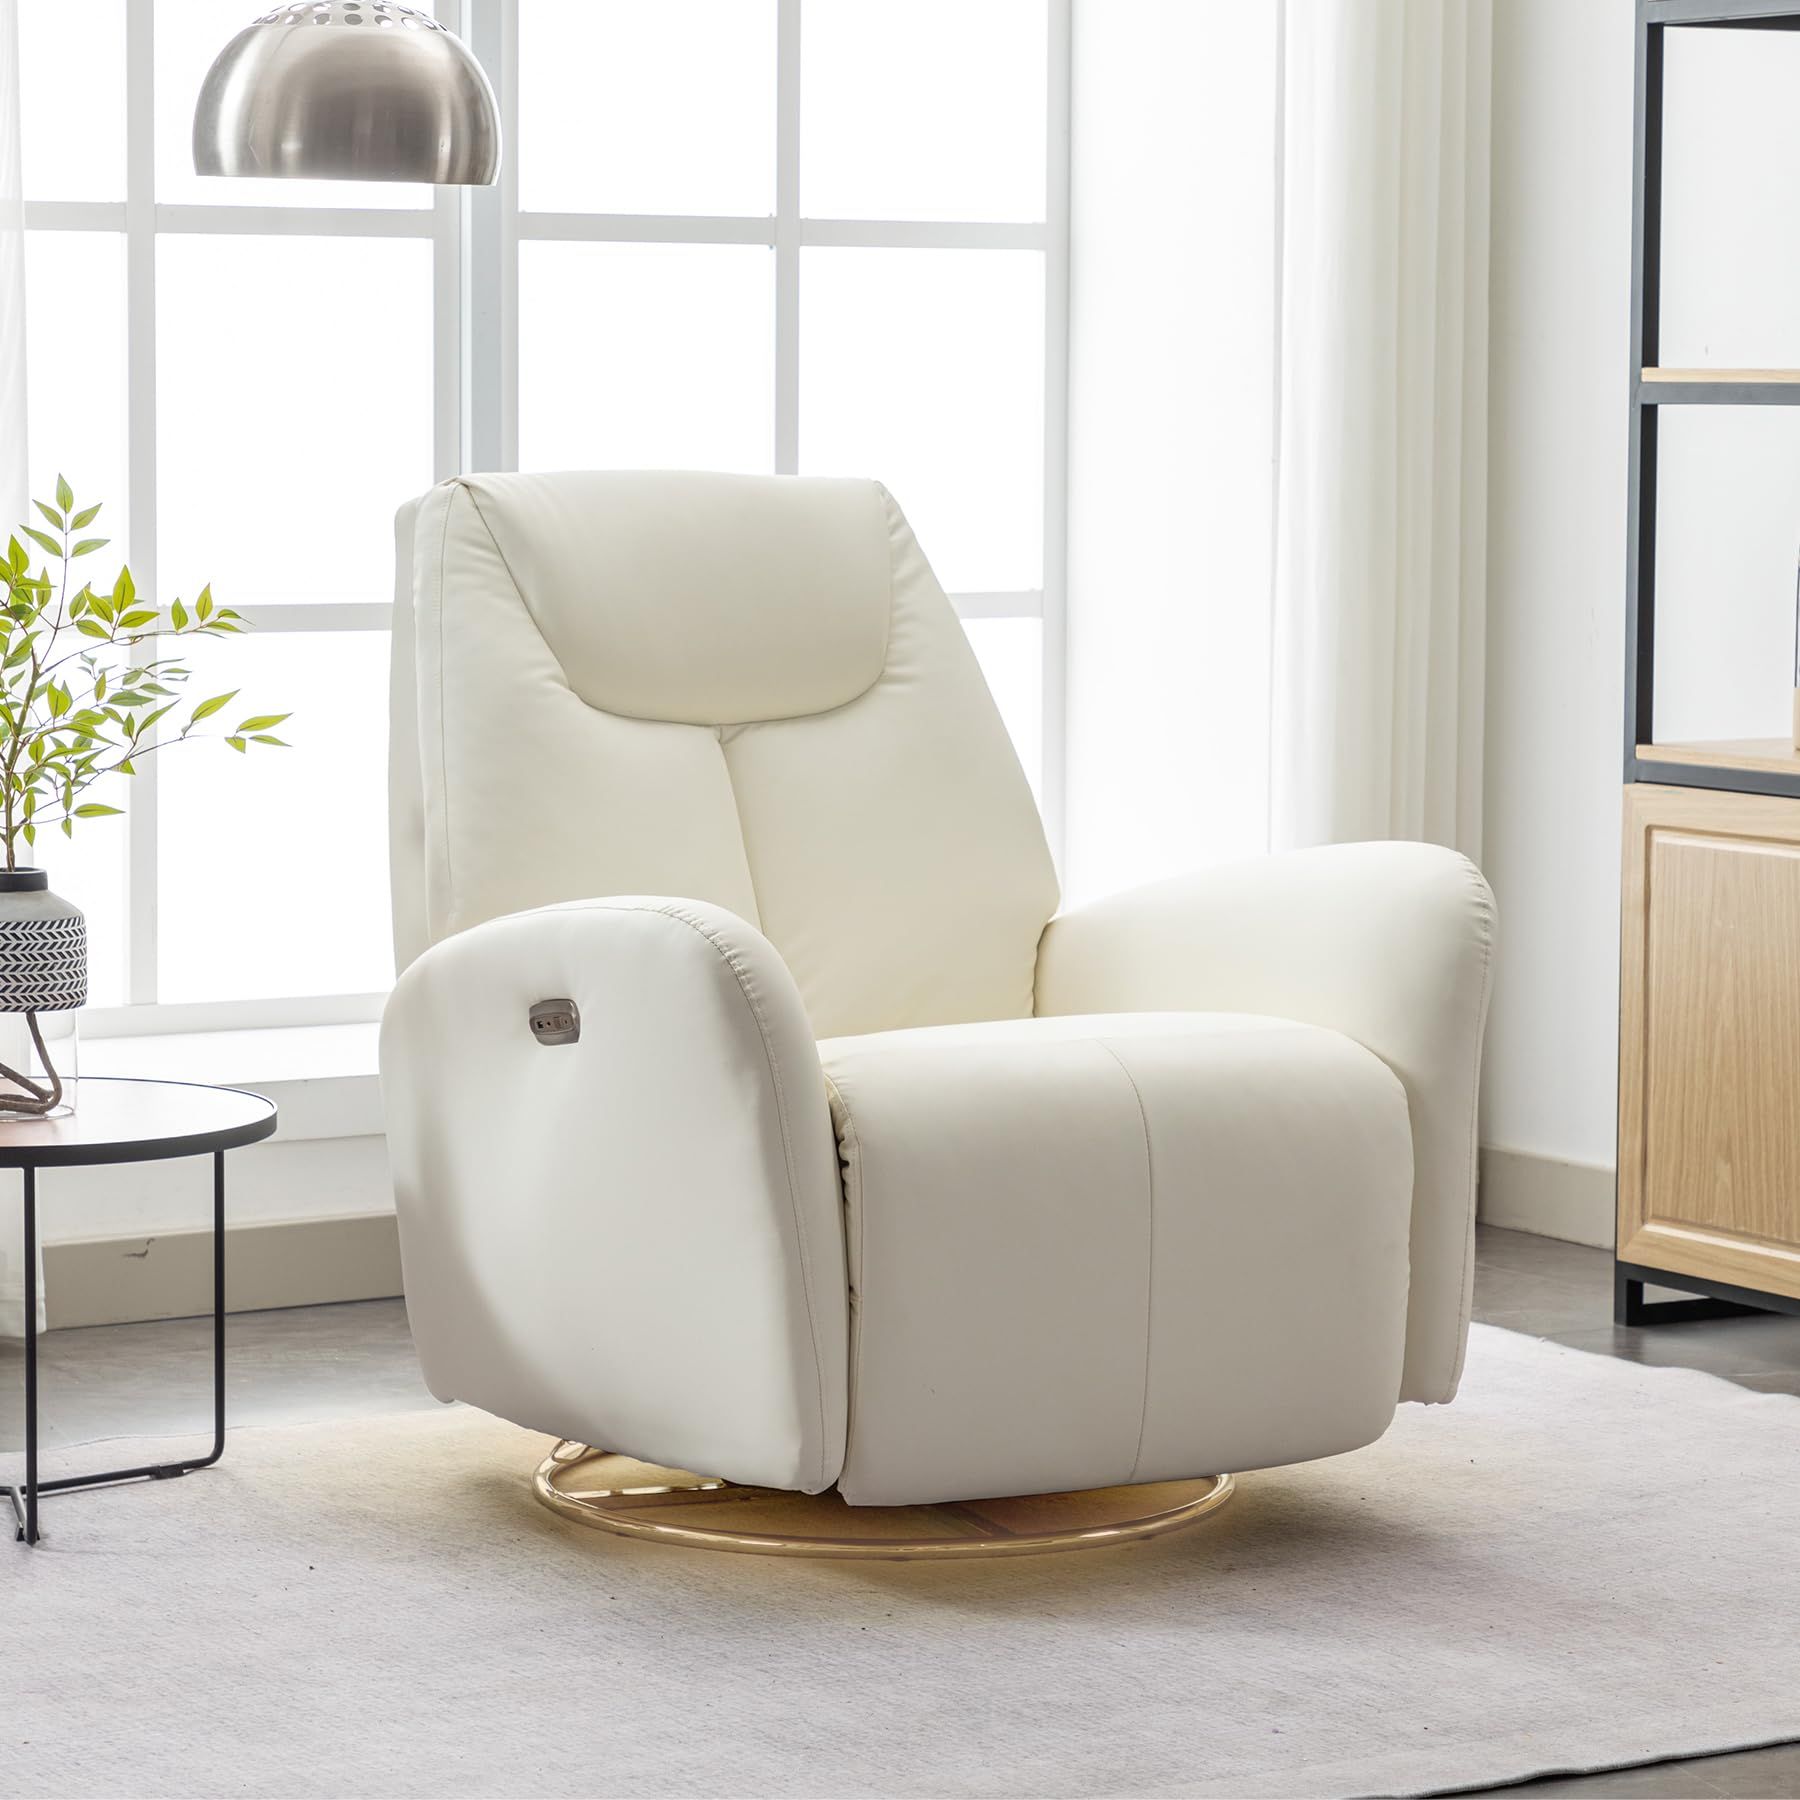 The Perfect Fit: Why an Adjustable Glider Recliner Is the Ultimate Solution for Customized Comfort